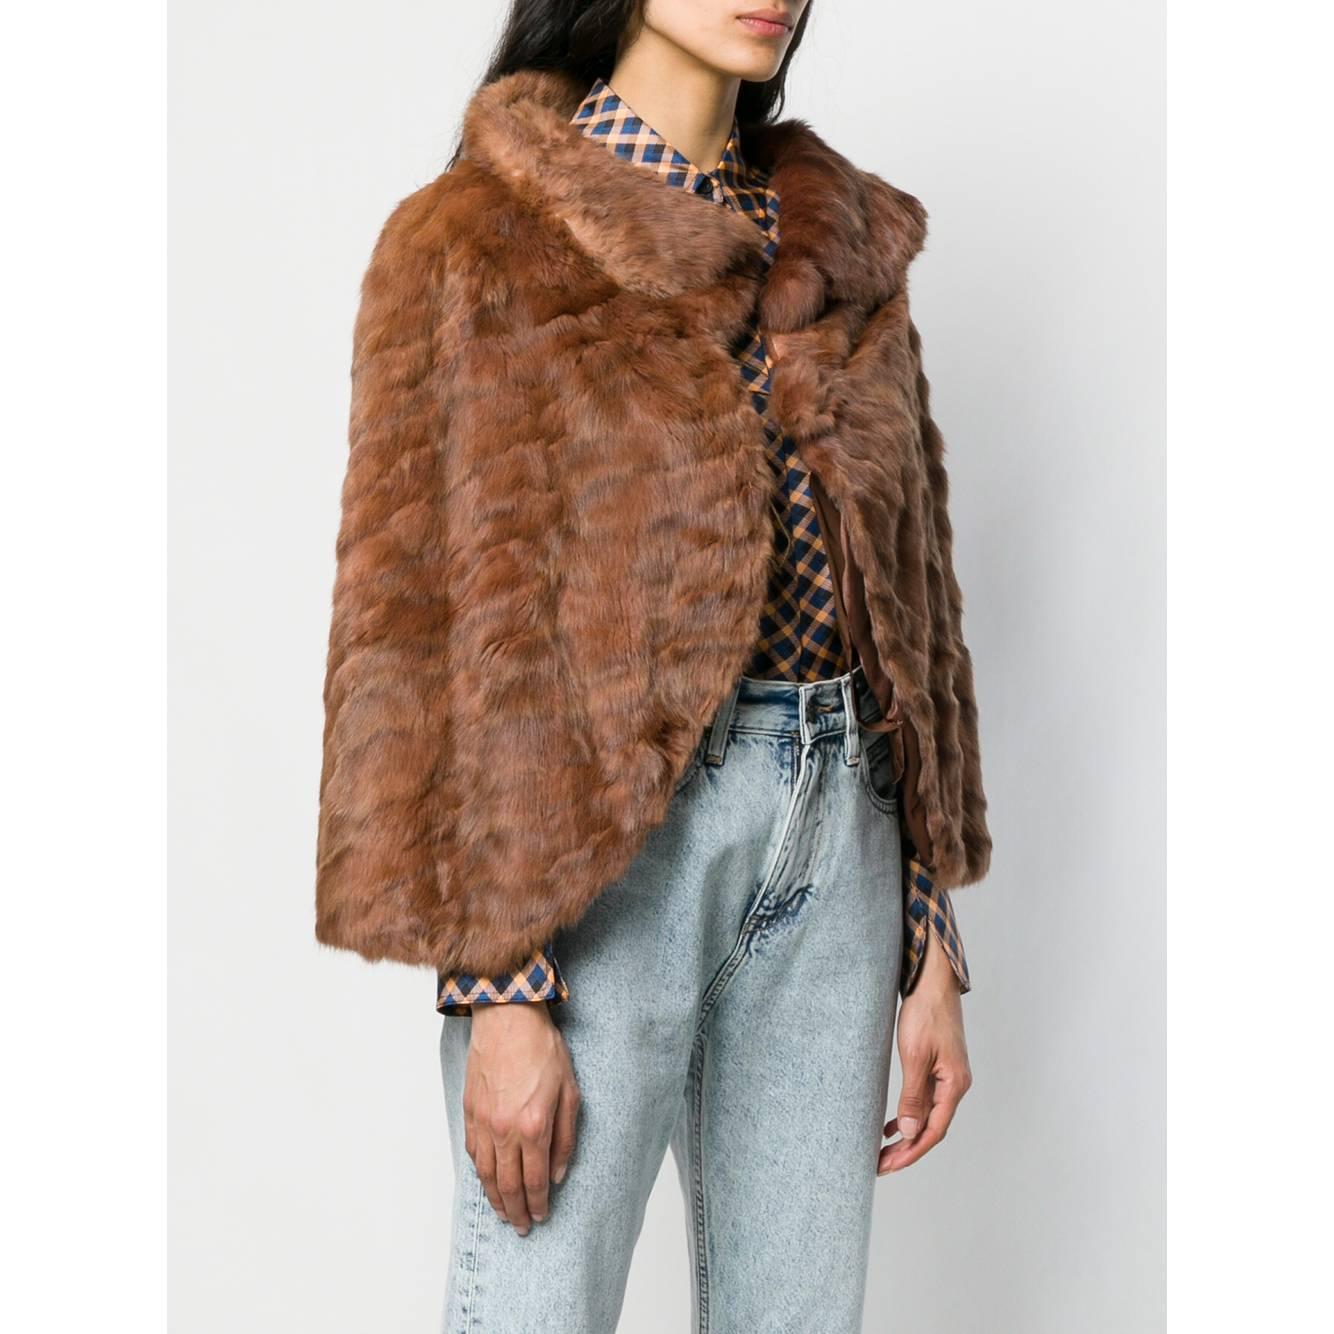 A.N.G.E.L.O. Vintage - ITALY
A.N.G.E.L.O. Vintage Cult brown rabbit fur cape. Slightly shawl round collar and front buttons. Short up to the waist model with rounded edges.

Please note this item cannot be shipped outside the European Union.

Years: